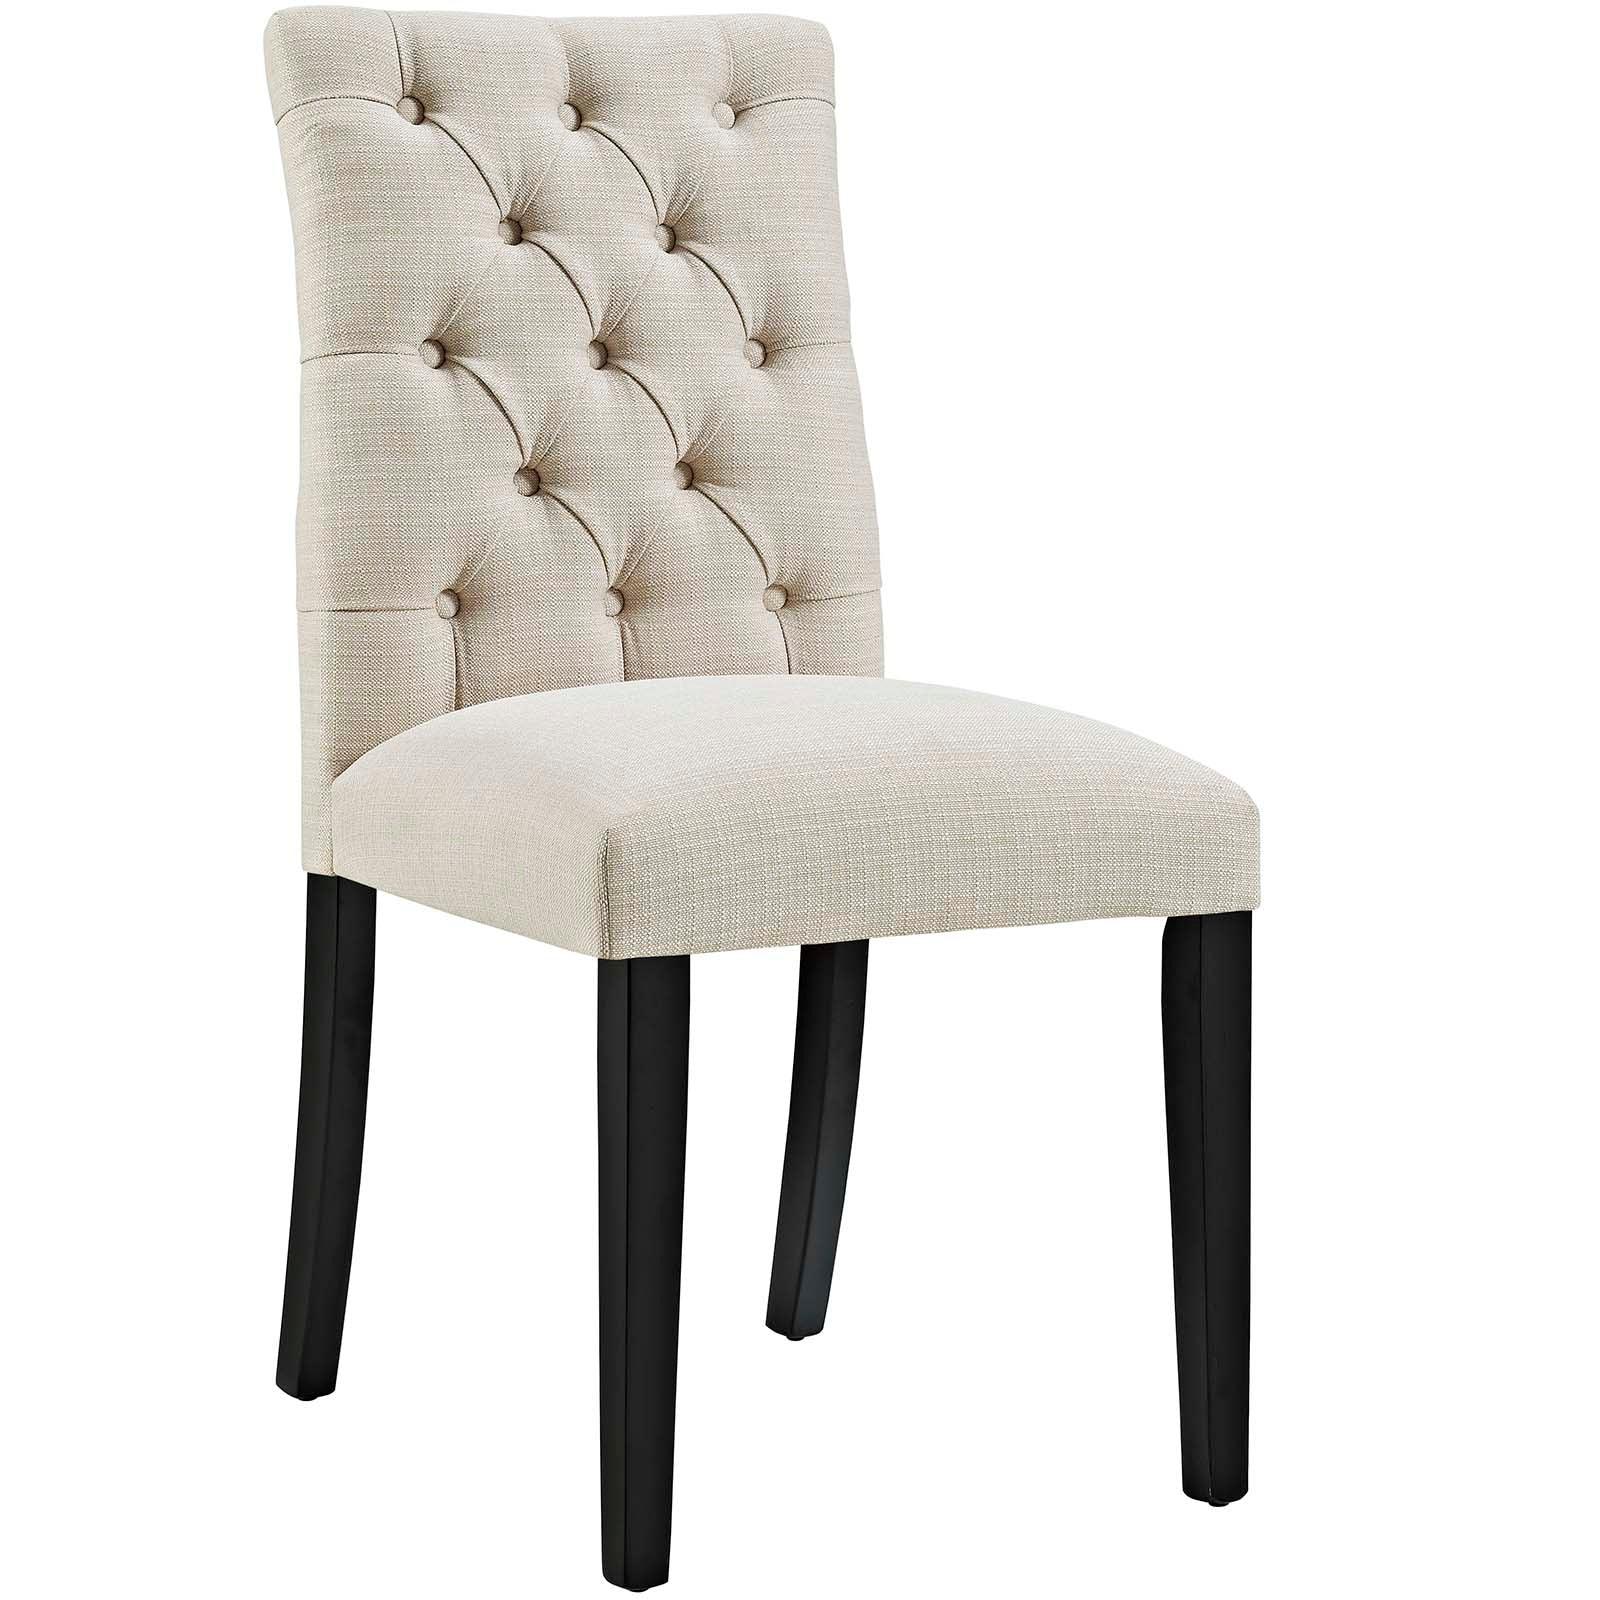 Modway Duchess Button Tufted Fabric Dining Chair FredCo